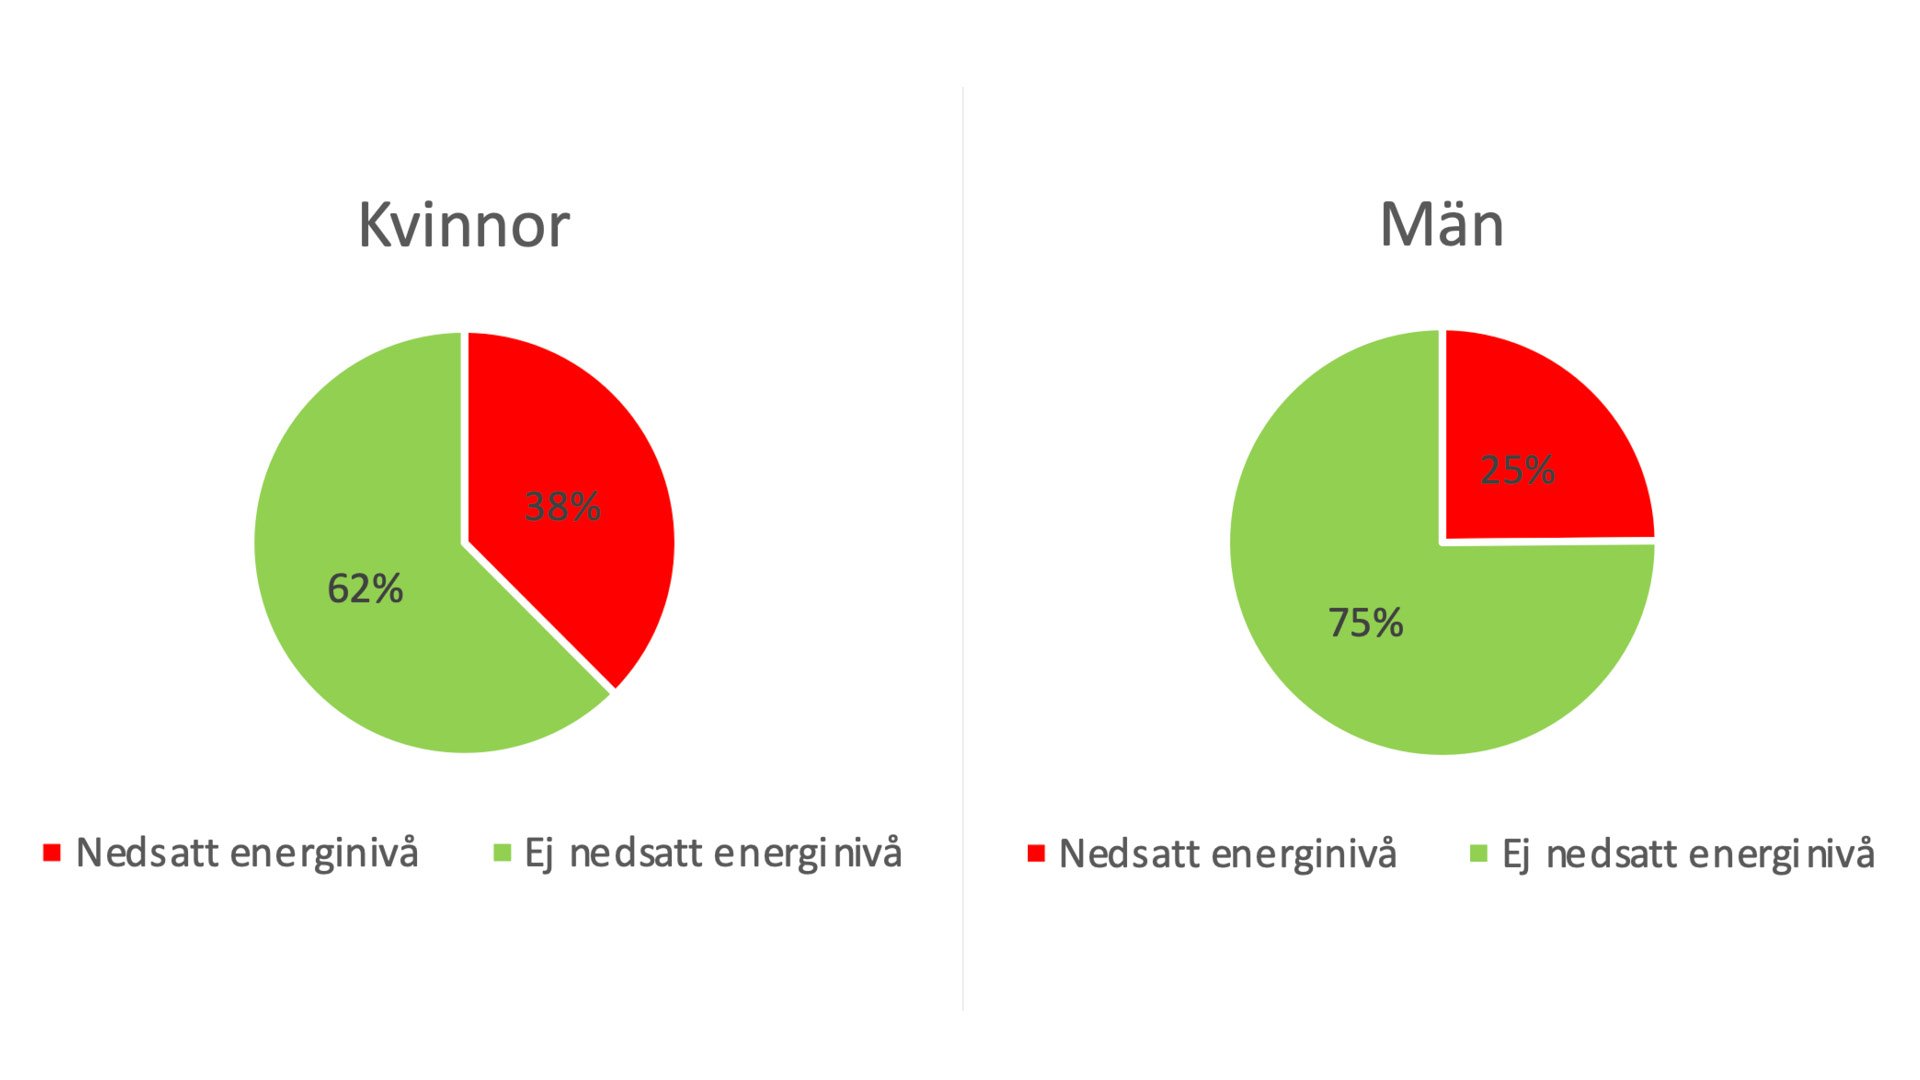 Graphic showing that women experience a longer energy level (38%) compared to men (25%) at work.